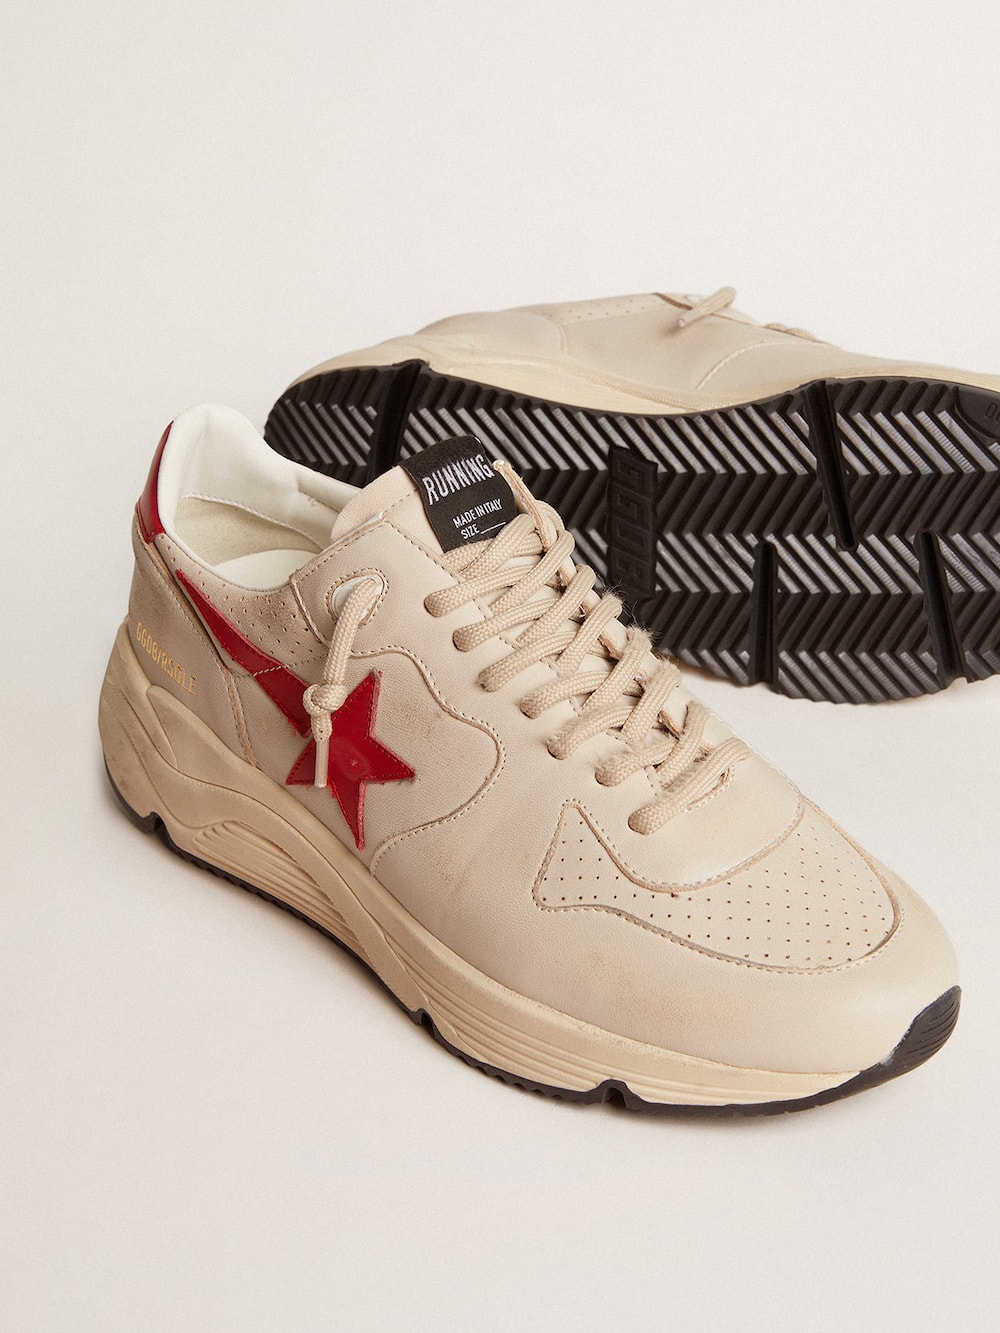 Golden Goose - Men's Running Sole in gray nappa leather with red nappa leather star and heel tab in 